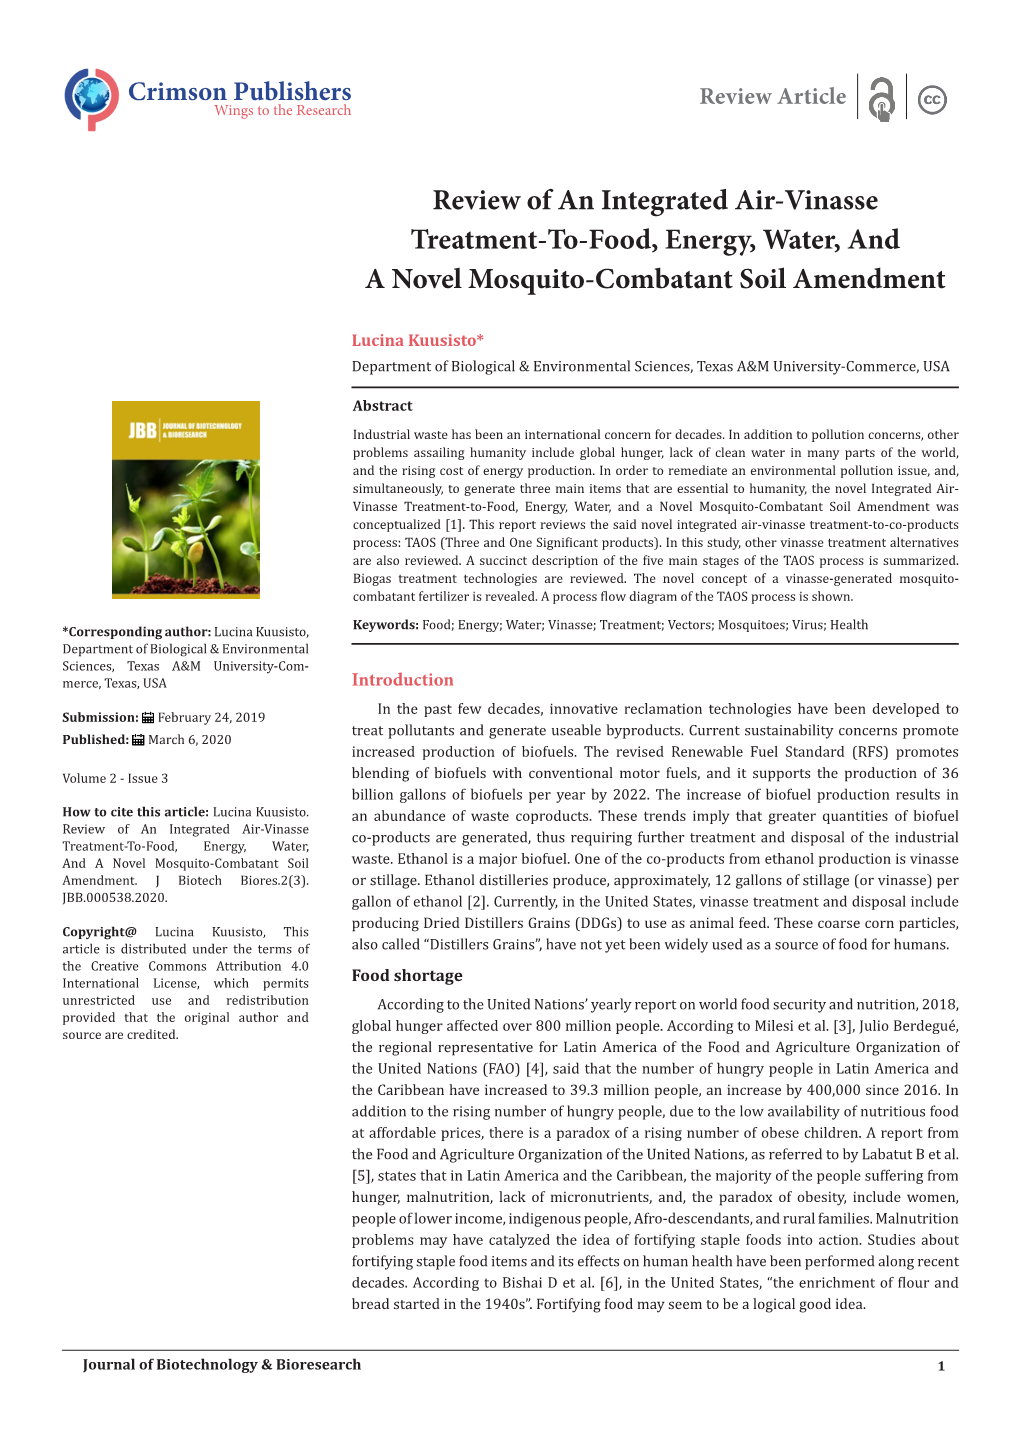 Review of an Integrated Air-Vinasse Treatment-To-Food, Energy, Water, and a Novel Mosquito-Combatant Soil Amendment